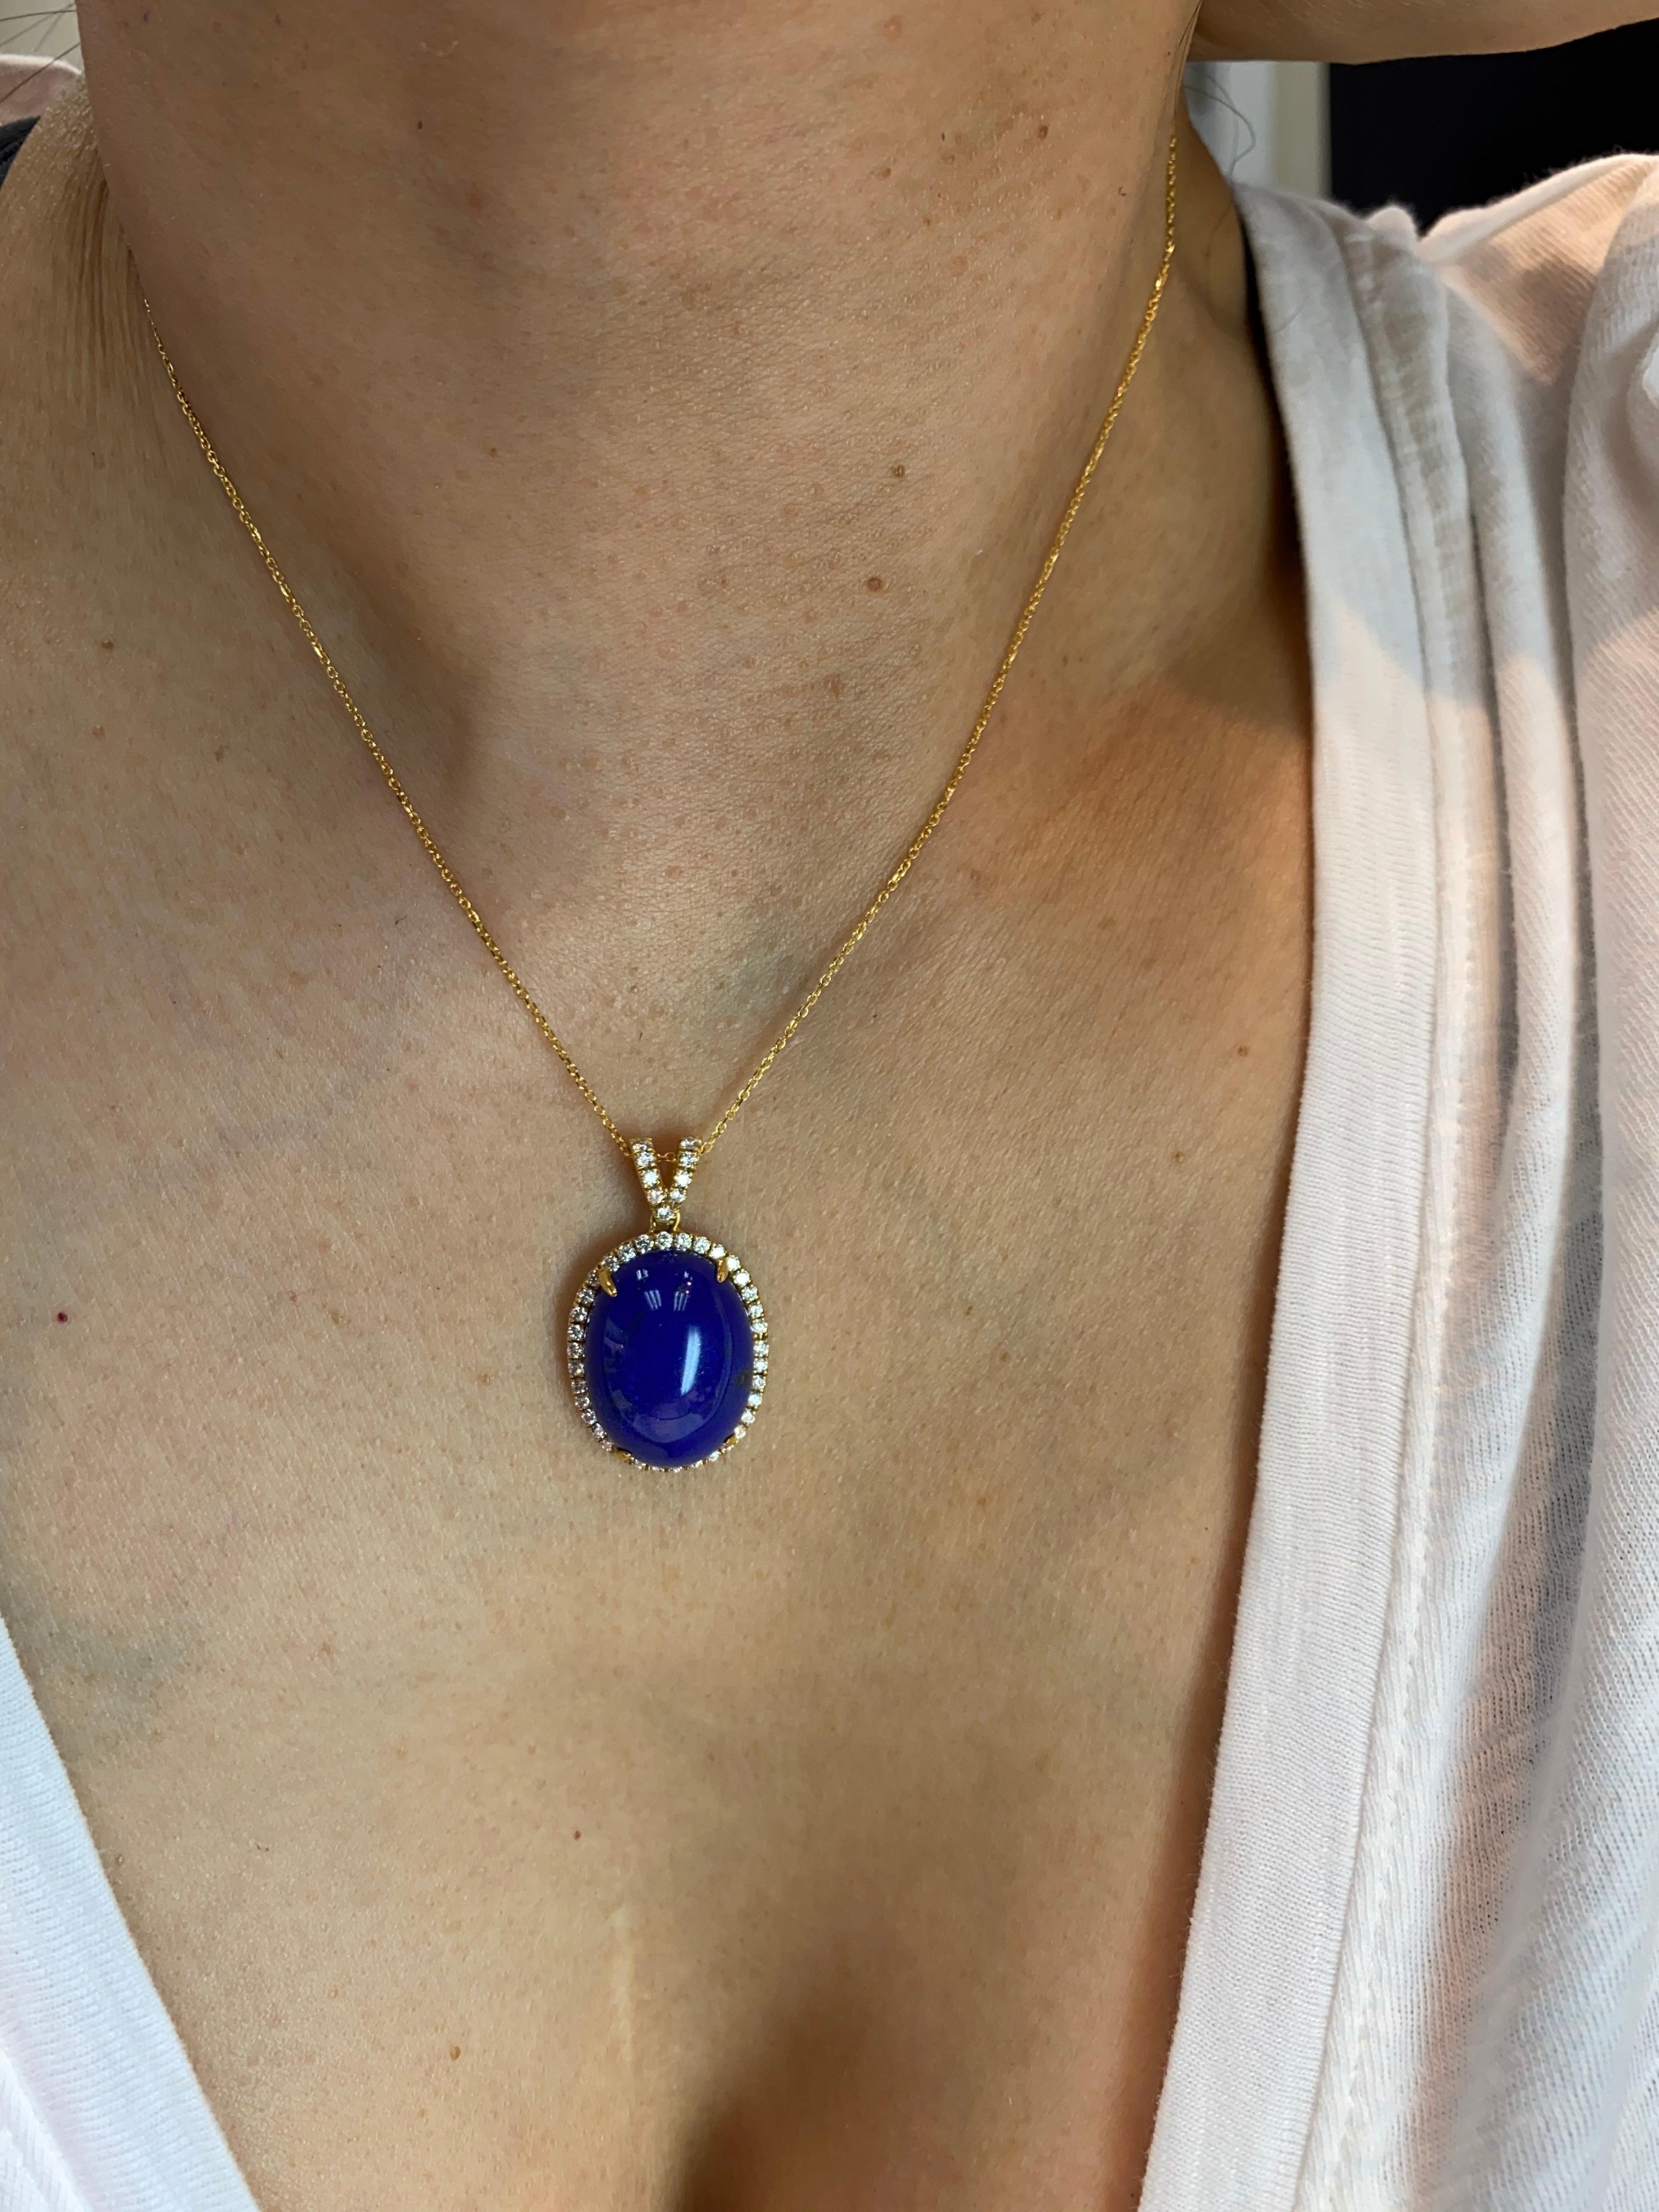 Here is nice diamond pendant made with deep royal blue Lapis. Old material. This Lapis cabs are large at around 20x15mm in diameter. The pendant are set in 18k yellow gold. Diamonds also surrounds the deep blue Lapis. There are 0.54 Cts of diamonds